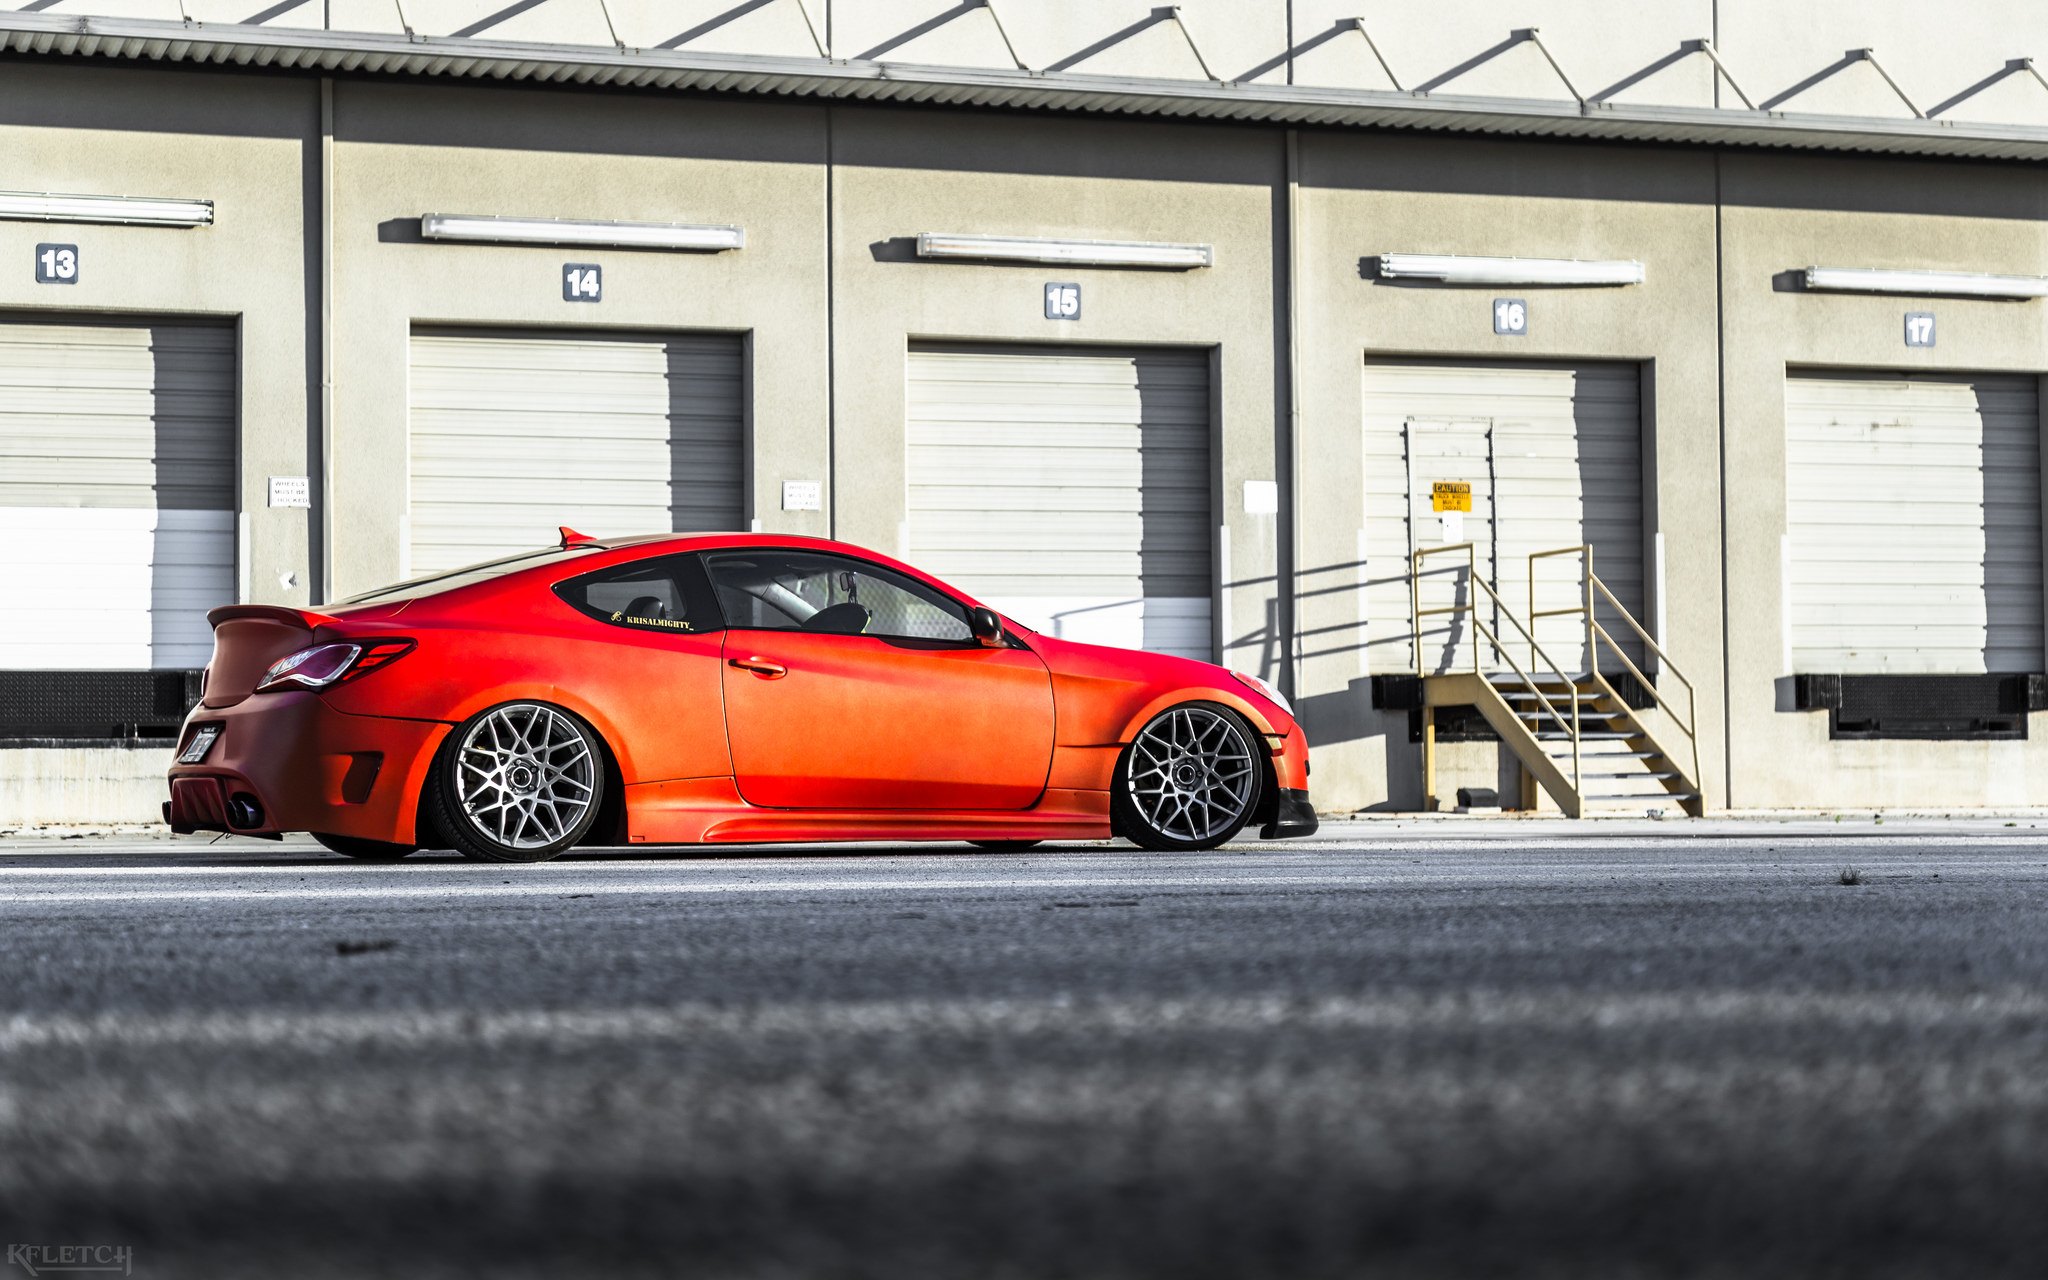 Red Hyundai Genesis Coupe with Aftermarket Side Skirts - Photo by kyle Fletcher